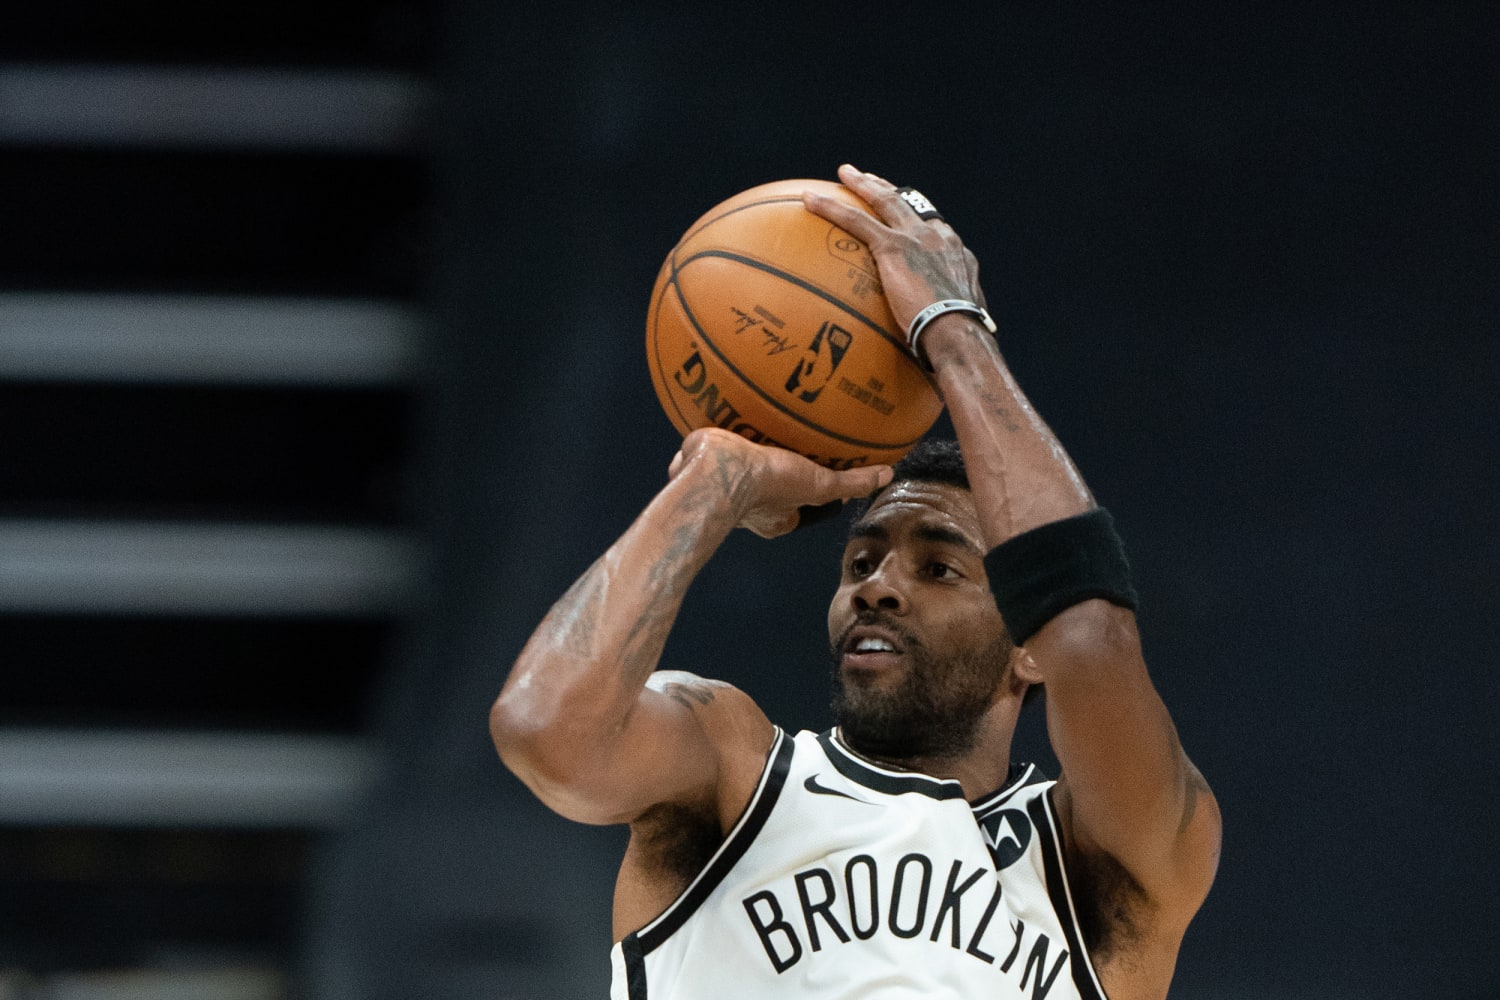 Playoffs show Nets' Kyrie Irving has come into his own, on court and off